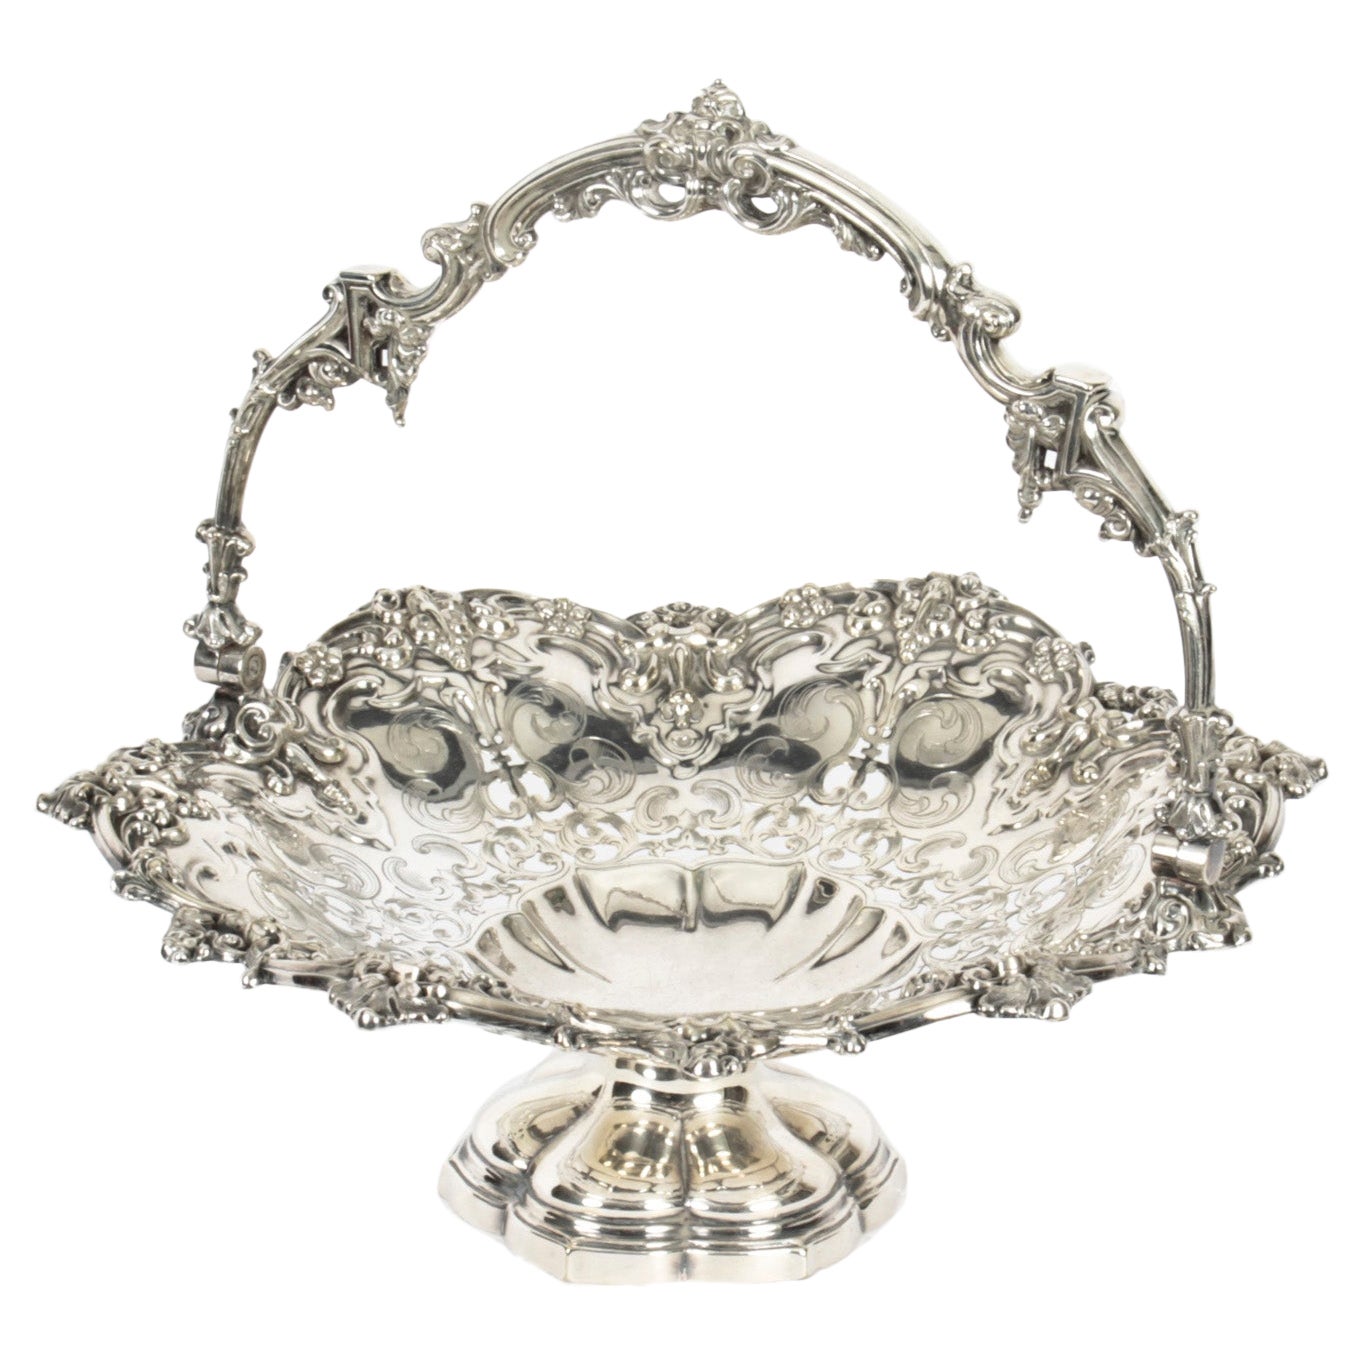 Antique Silver Plated Fruit Basket Wilkinson & Co 19th Century